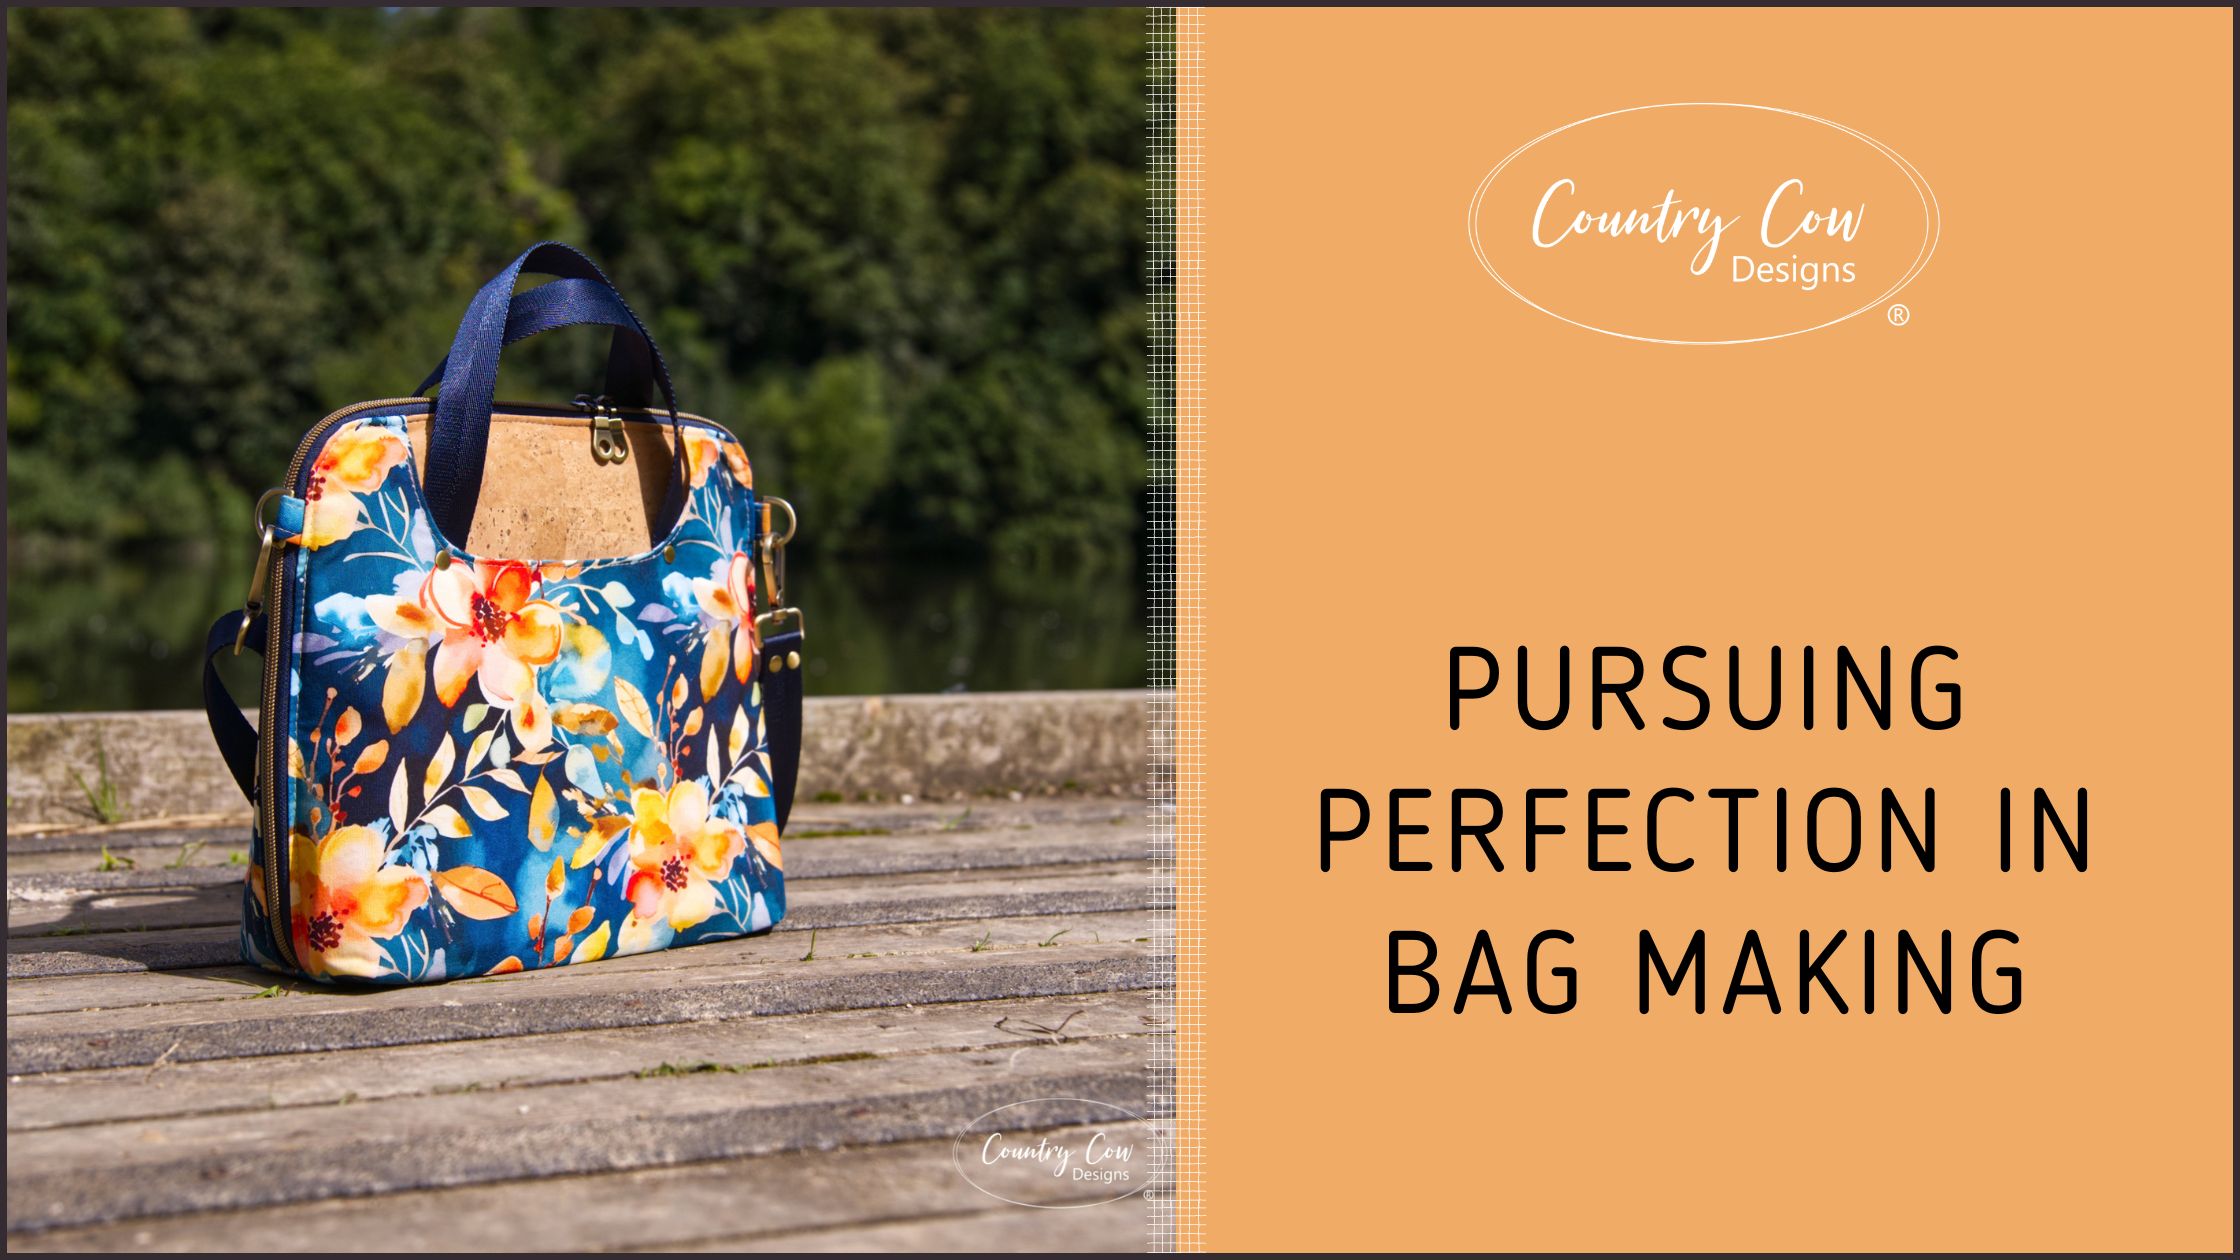 Pursuing Perfection in Bag Making